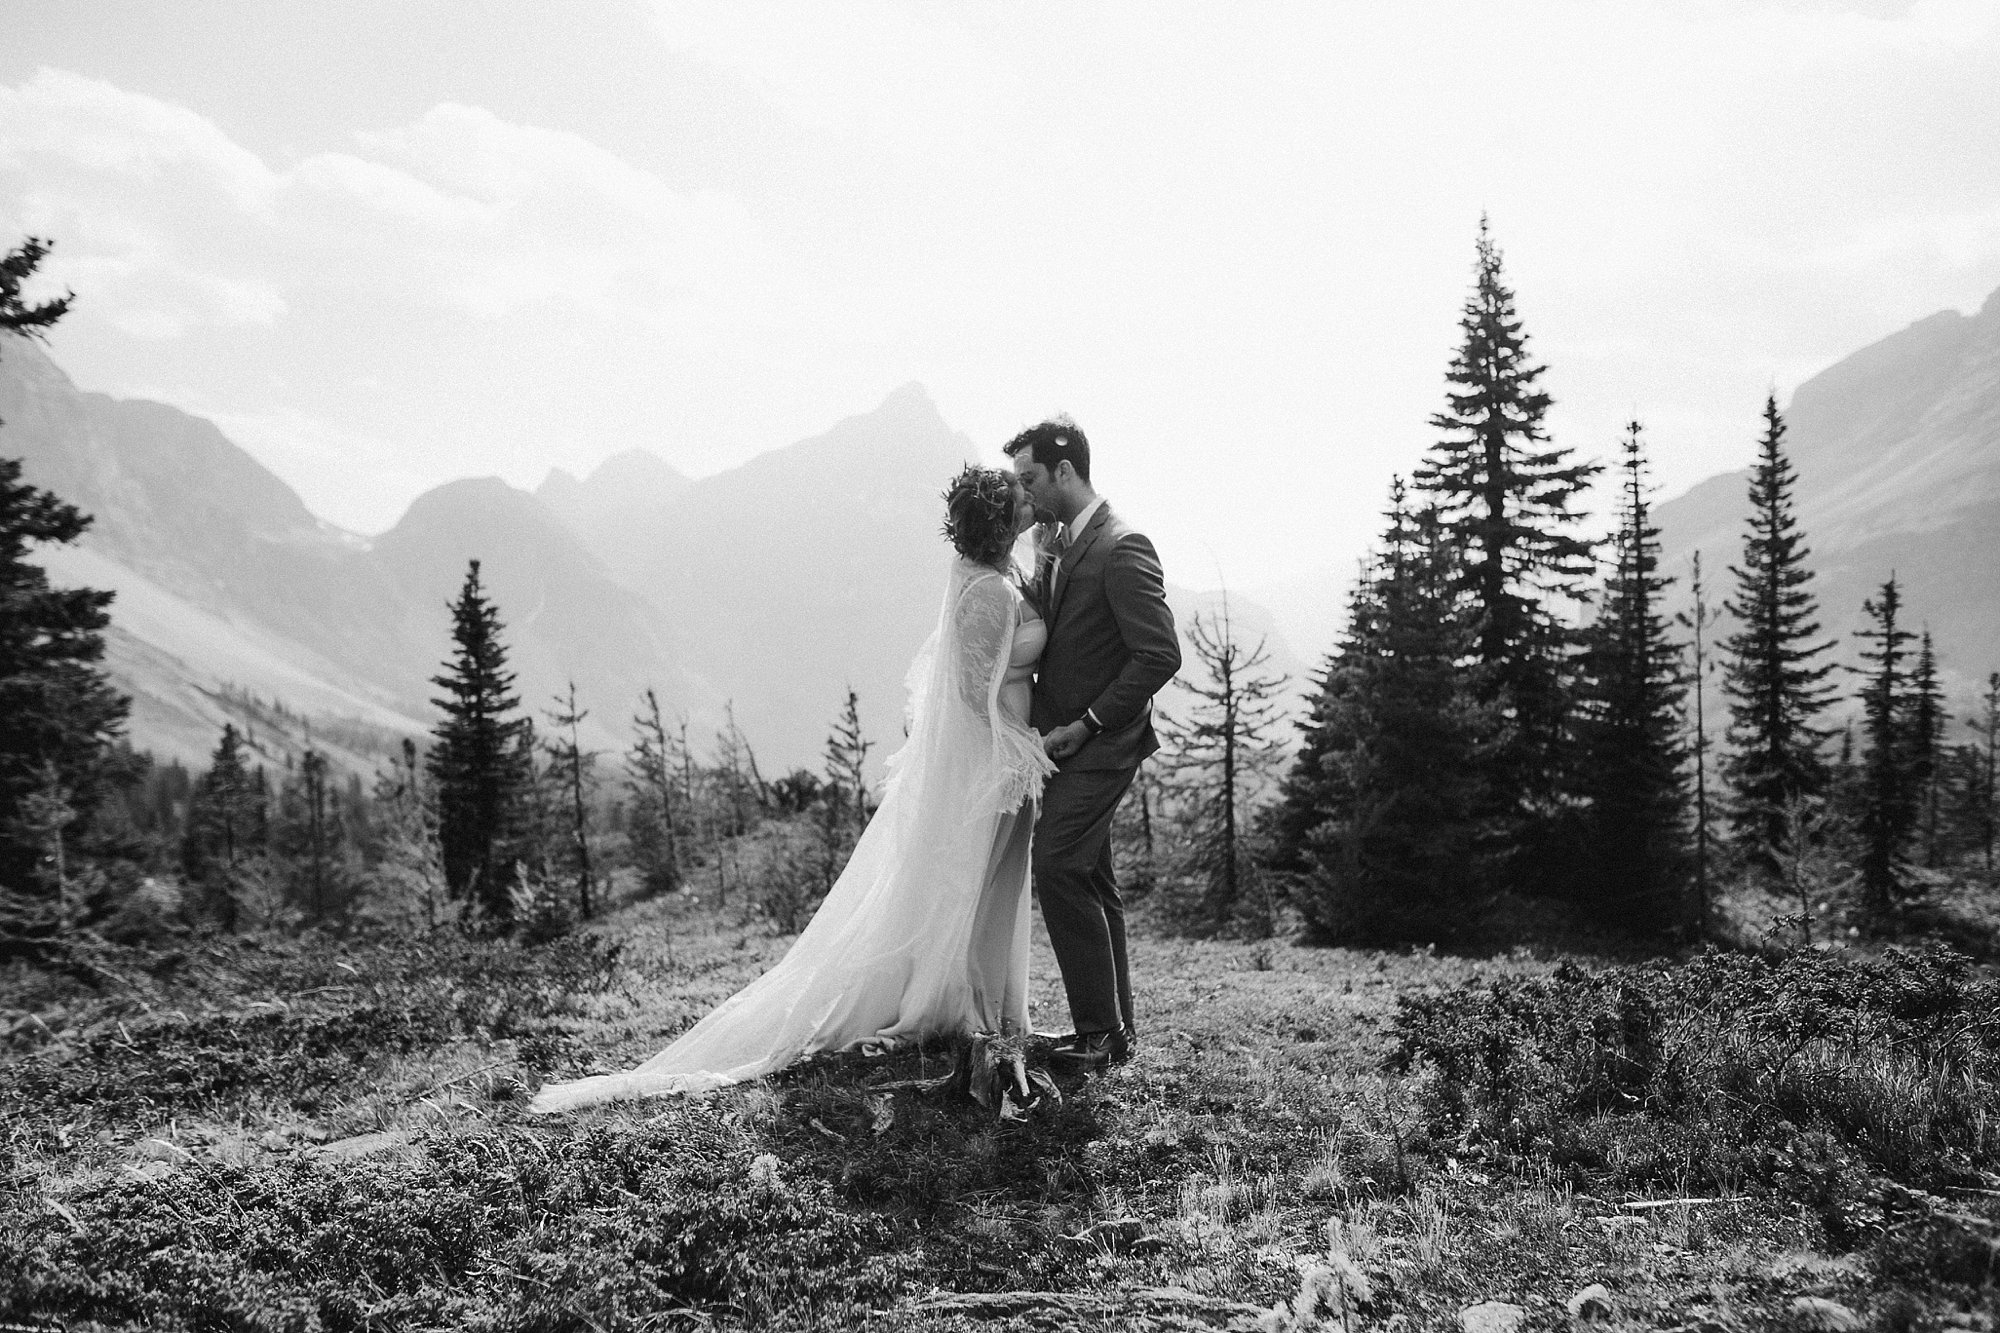 A bride and groom's first kiss in Banff